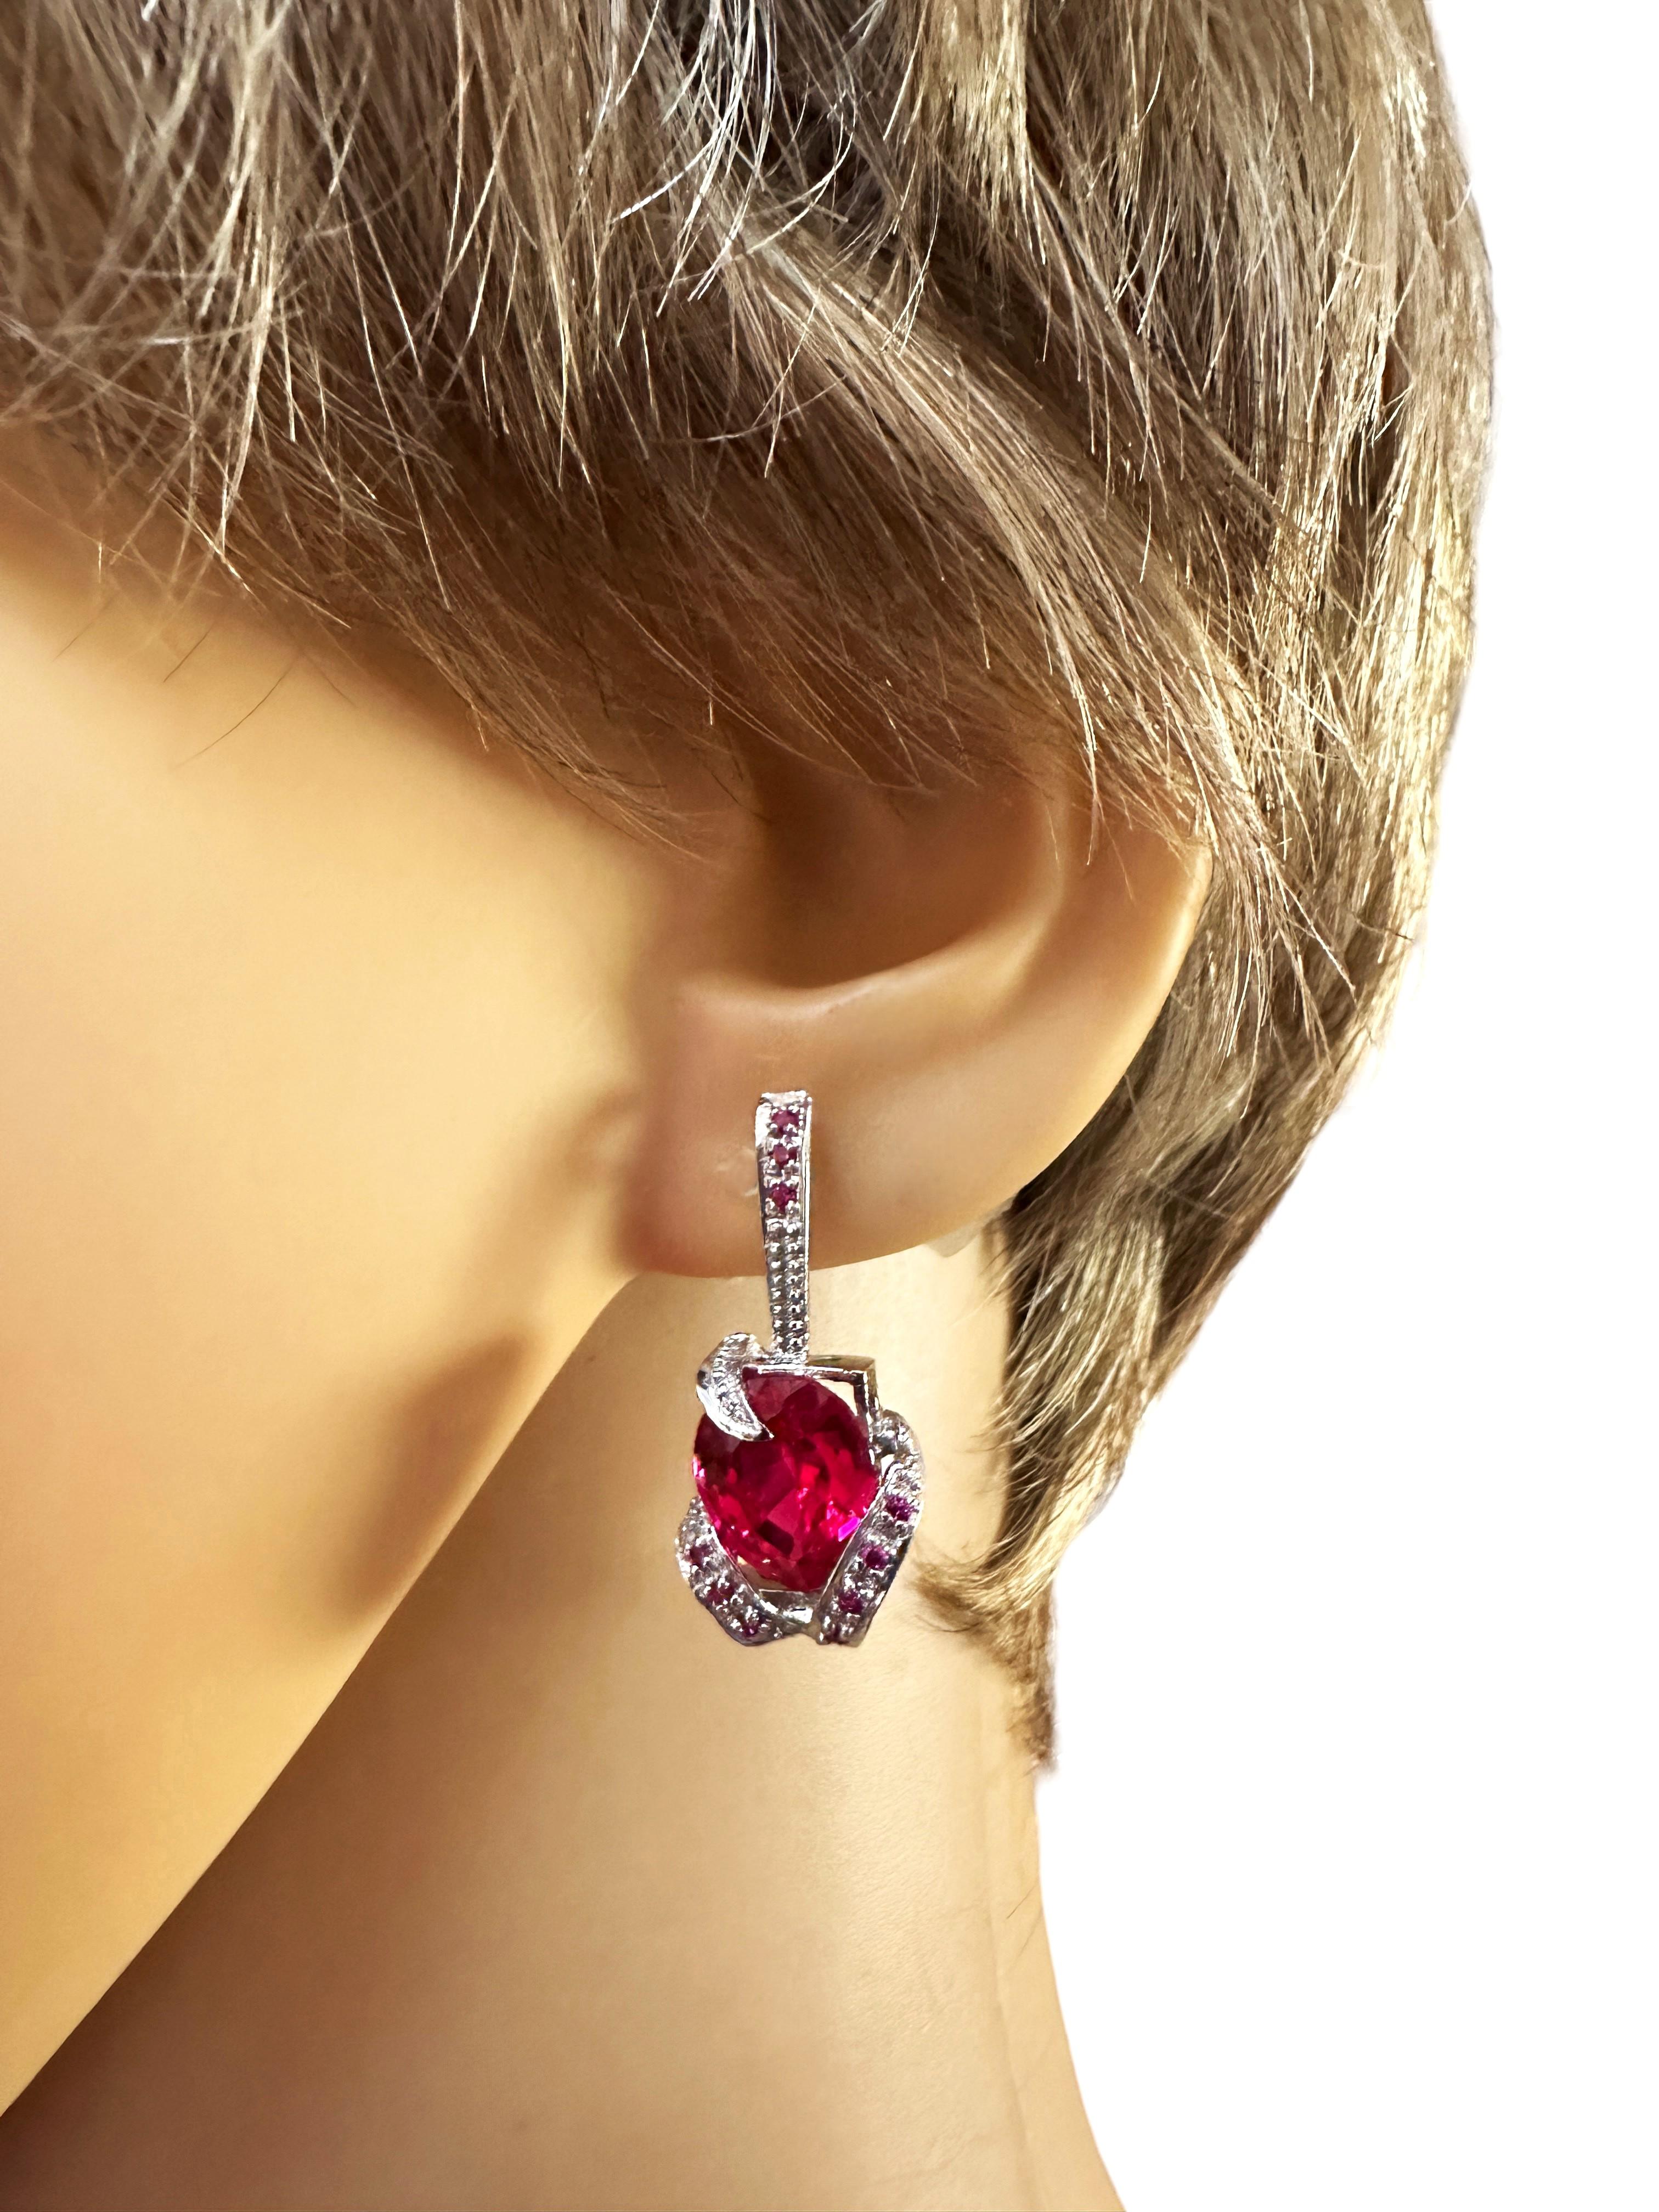 Art Deco New African 9.70 Ct Pinkish Red Sapphire Sterling Earrings For Sale